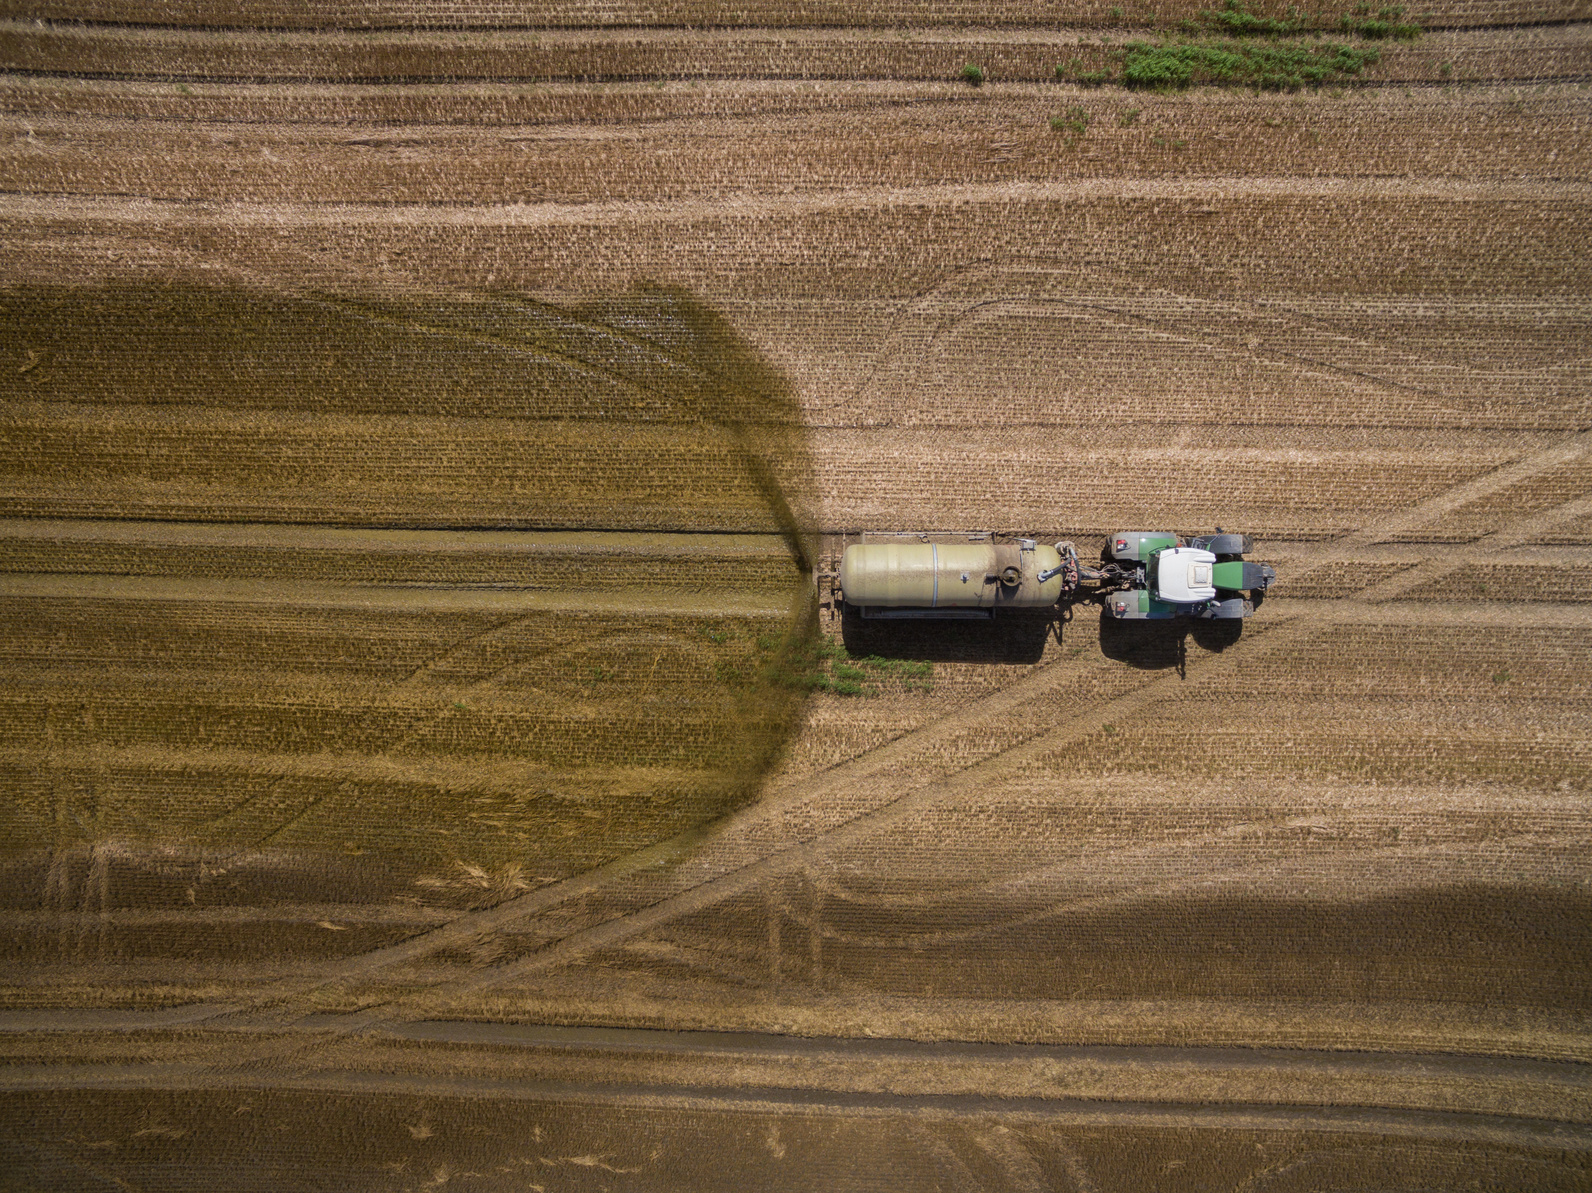 aerial view of a tractor with a trailer fertilizes a freshly plowed agriculural field with manure in germany